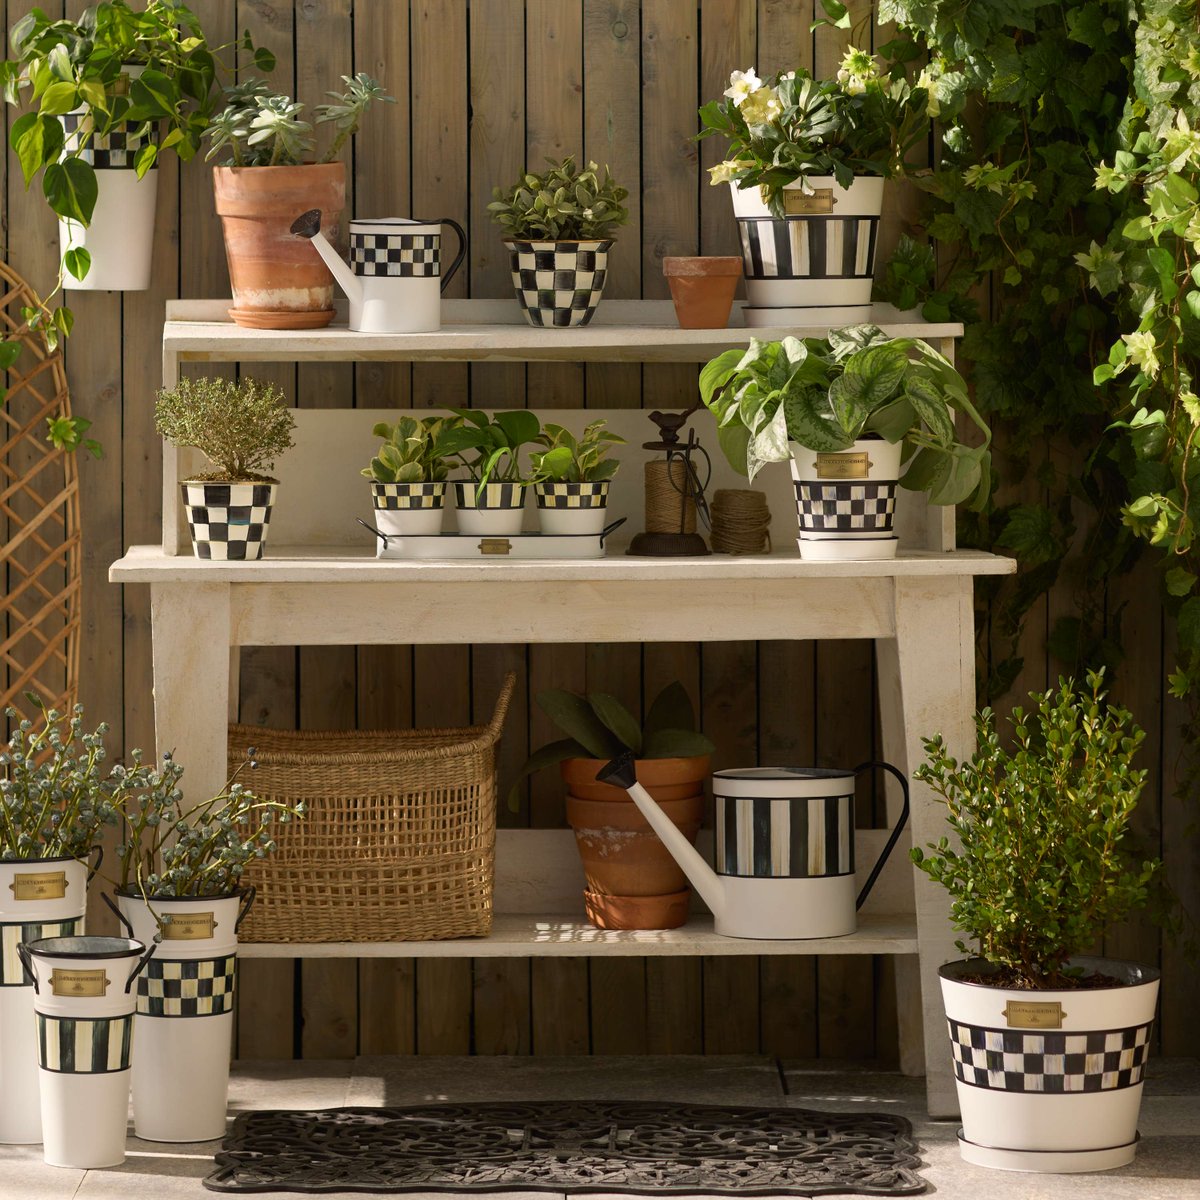 Don't miss out on the chance to transform your garden into a beautiful sanctuary with our stunning collection!  Pre-order now to secure your favourites.  Hurry, orders must be in by the end of the week!  #GardenGoals #PreOrderNow

mackenzie-childs.co.uk/pre-order